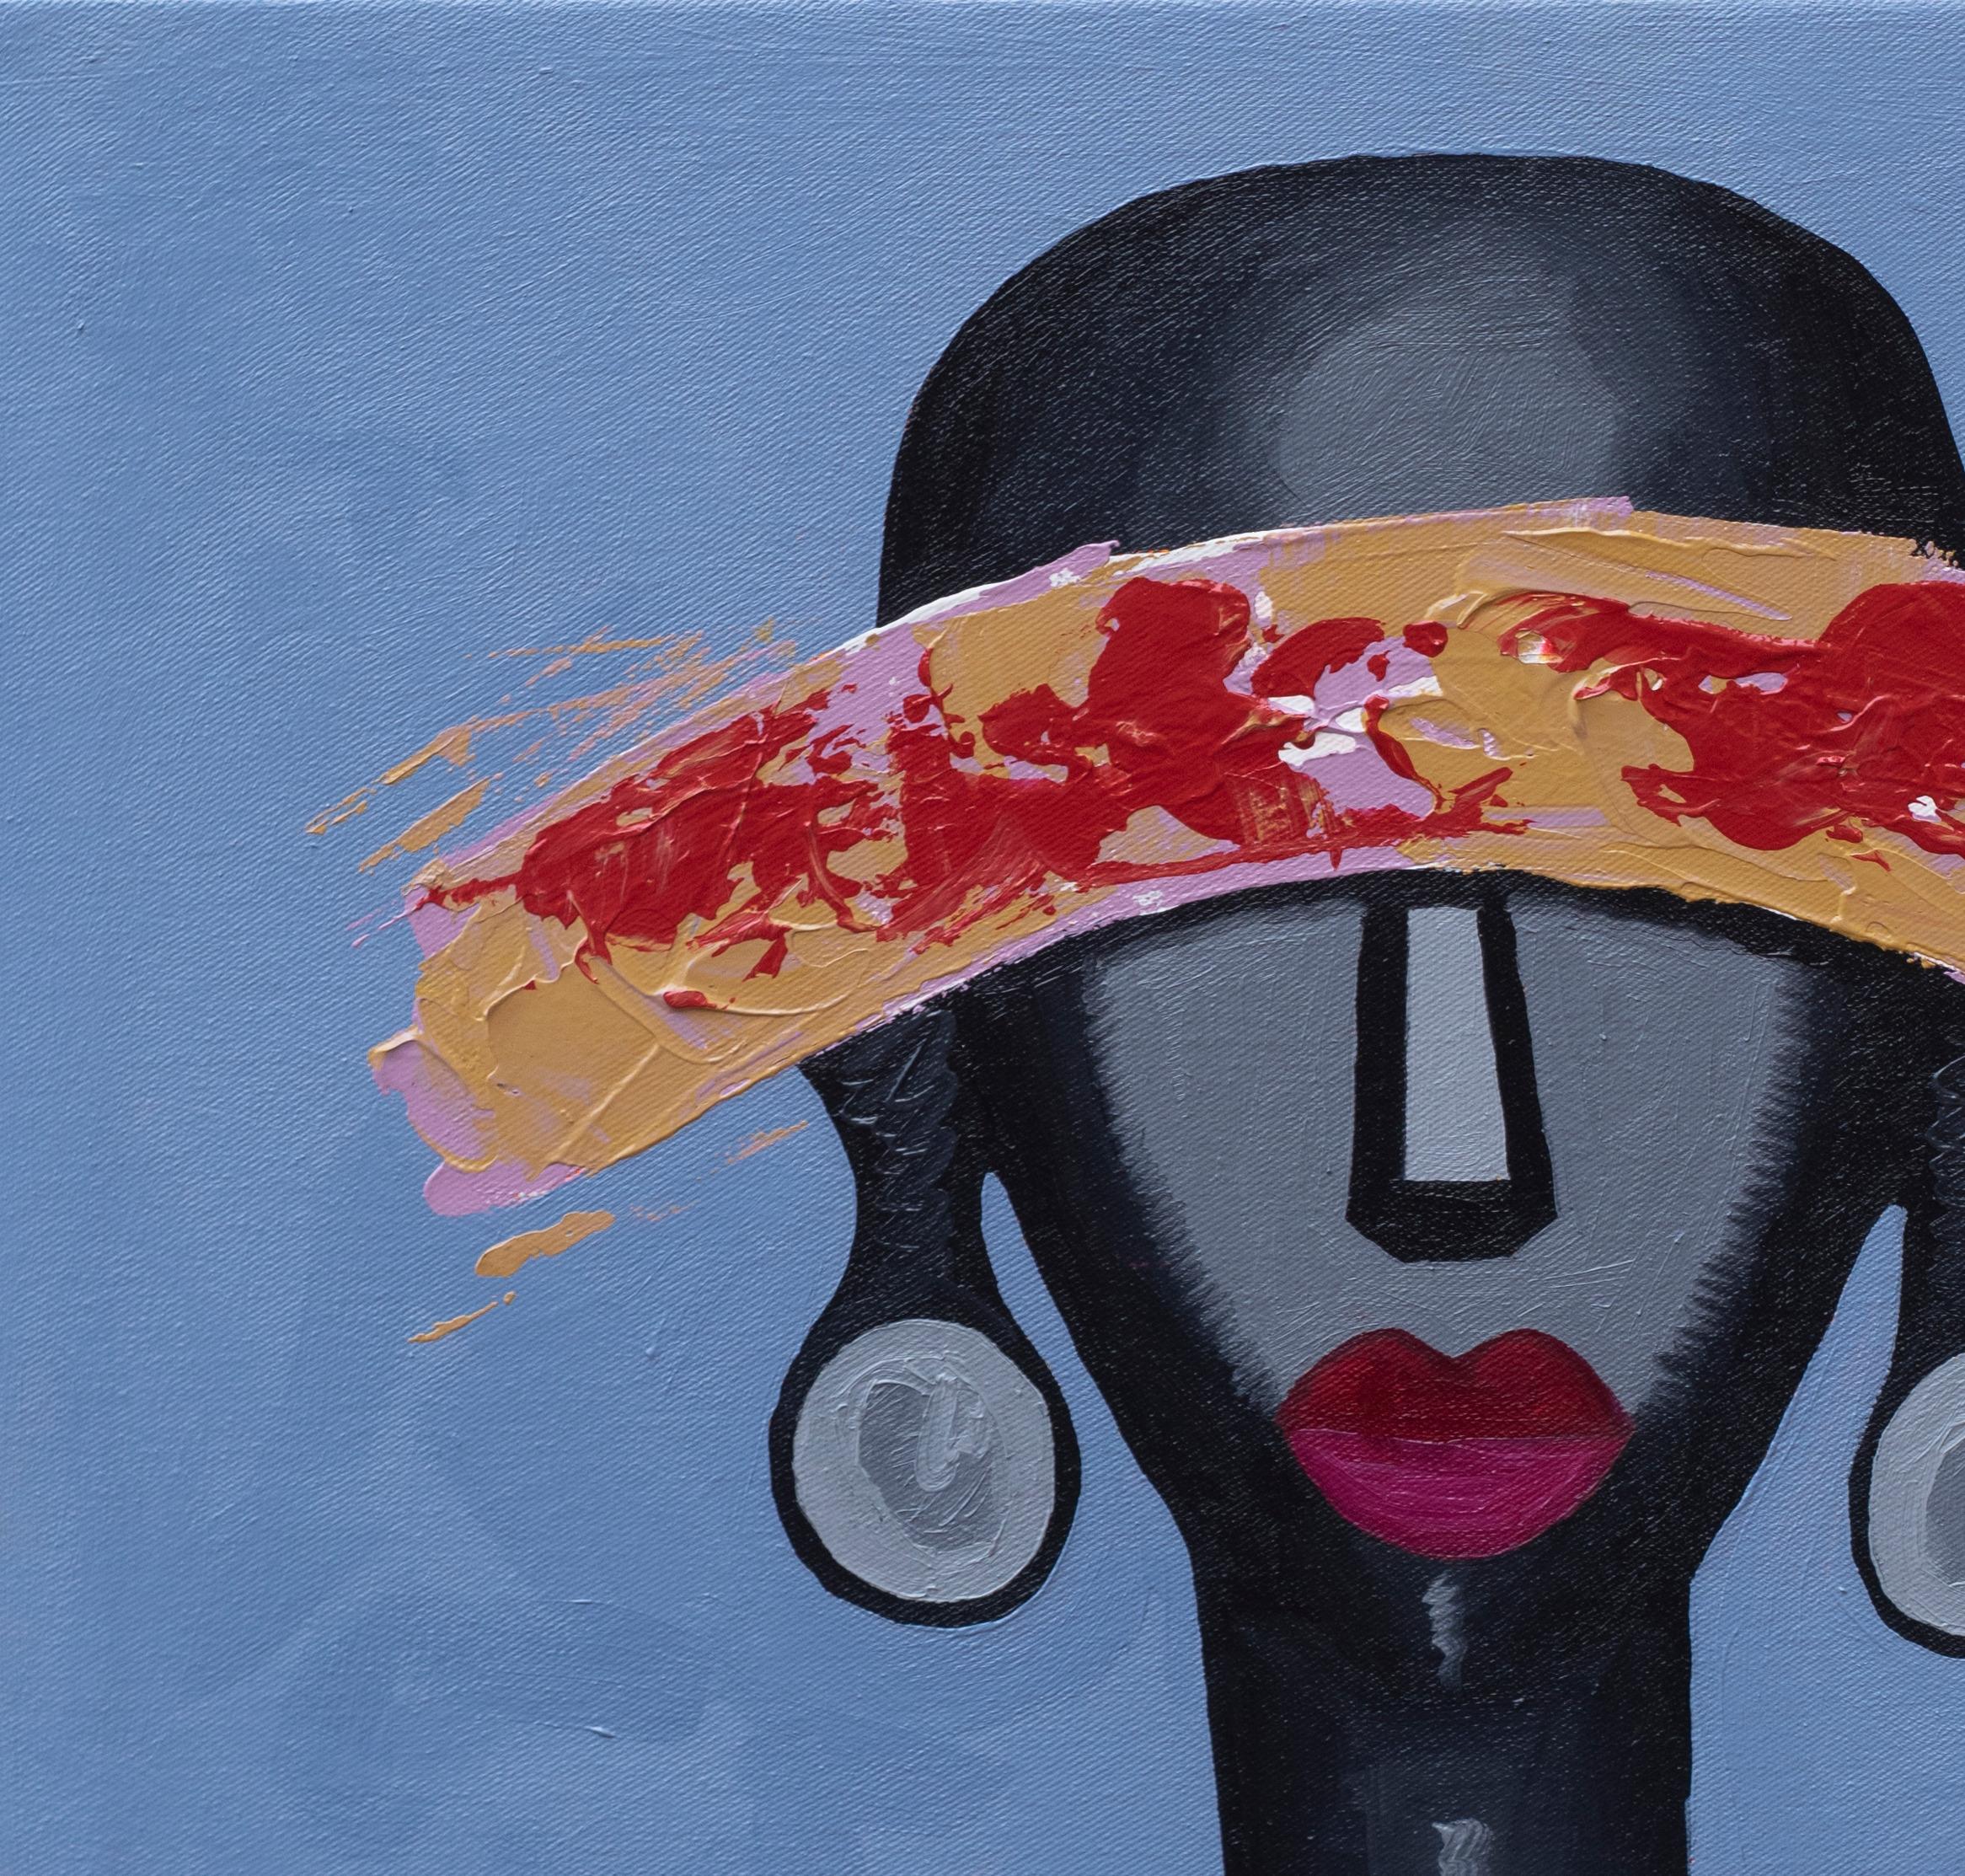 Out of Sight 1 - Painting by Chinedu Chidebe